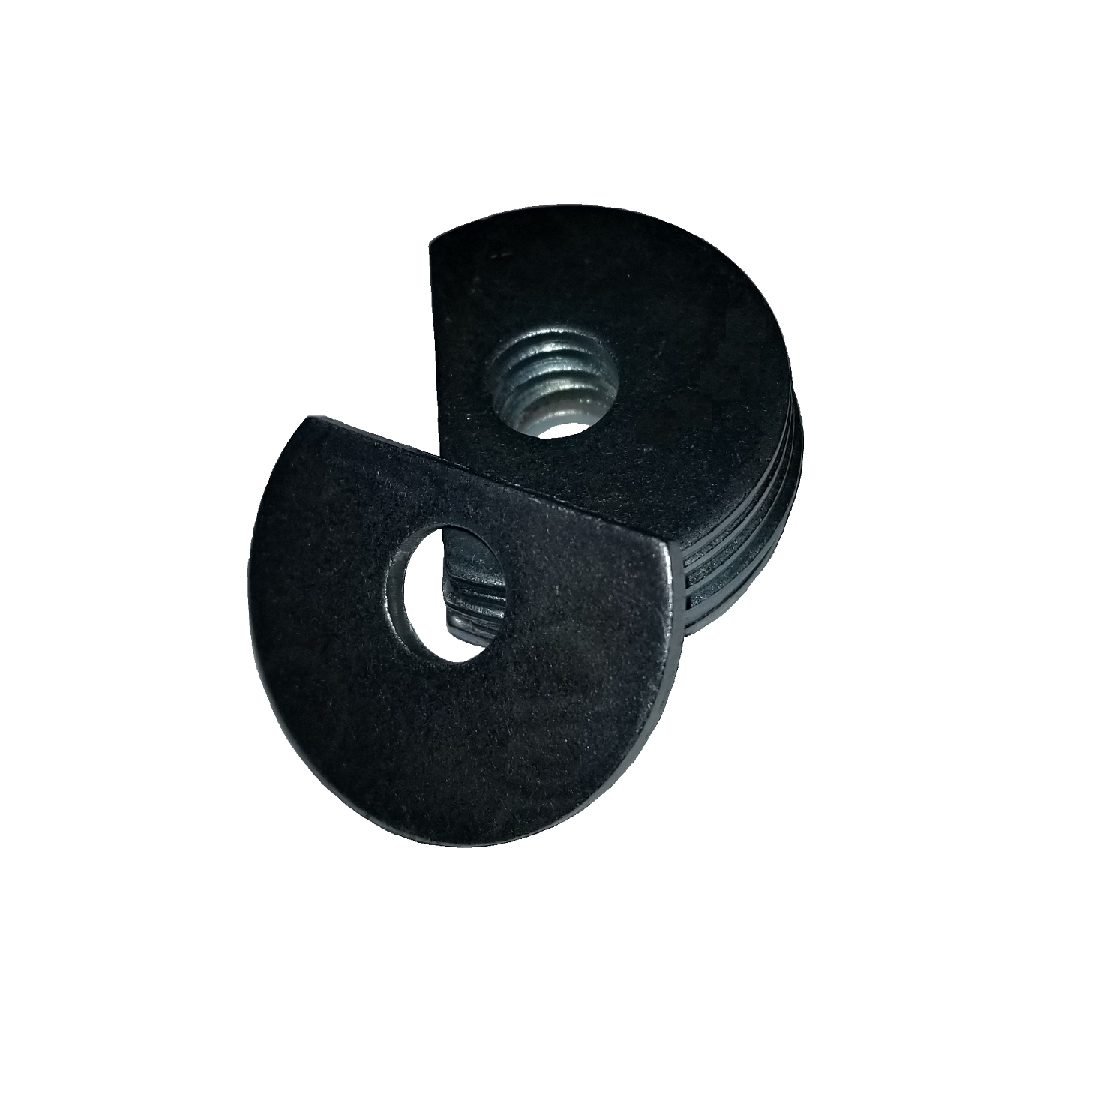 Clipped OD Washer - 0.687 ID, 1.500 OD, 0.125 Thick, Low Carbon Steel - Soft